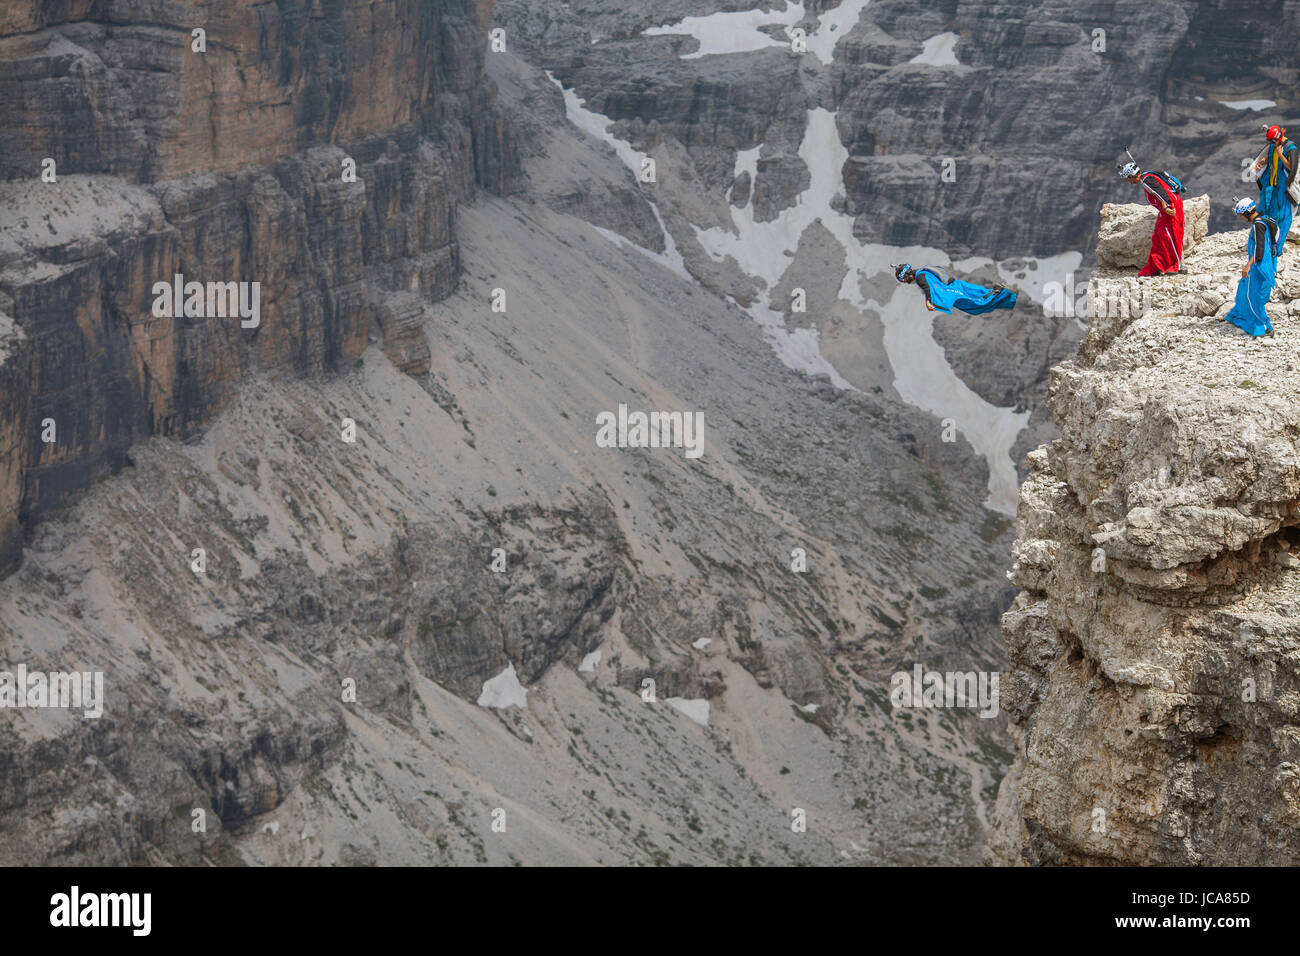 A group of base jumpers stand ready as one pilot takes flight in the Sass Pordoi region of the Dolomites. Italy. Stock Photo